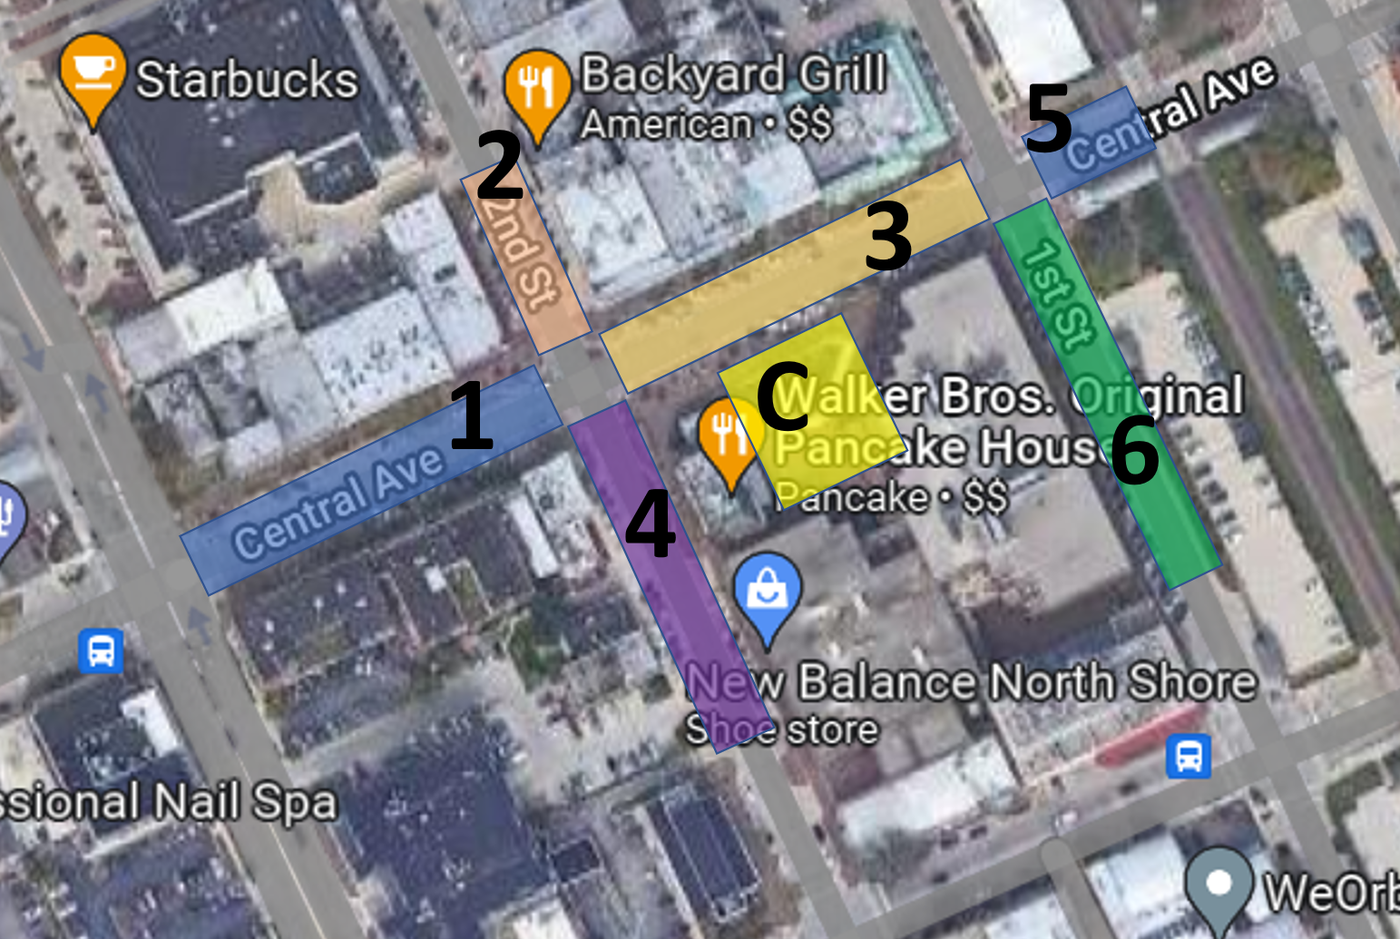 This map depicts areas where items were dropped on July 4 and will be returned. On Central between Green Bay and Second (Zone 1) On Second Street between Central and Elm (Zone 2) On Central between First and Second (Zone 3) On Second between Central and Laurel (Zone 4) On Central between First and the railroad tracks (Zone 5)
On First between Central and Laurel (Zone 6)